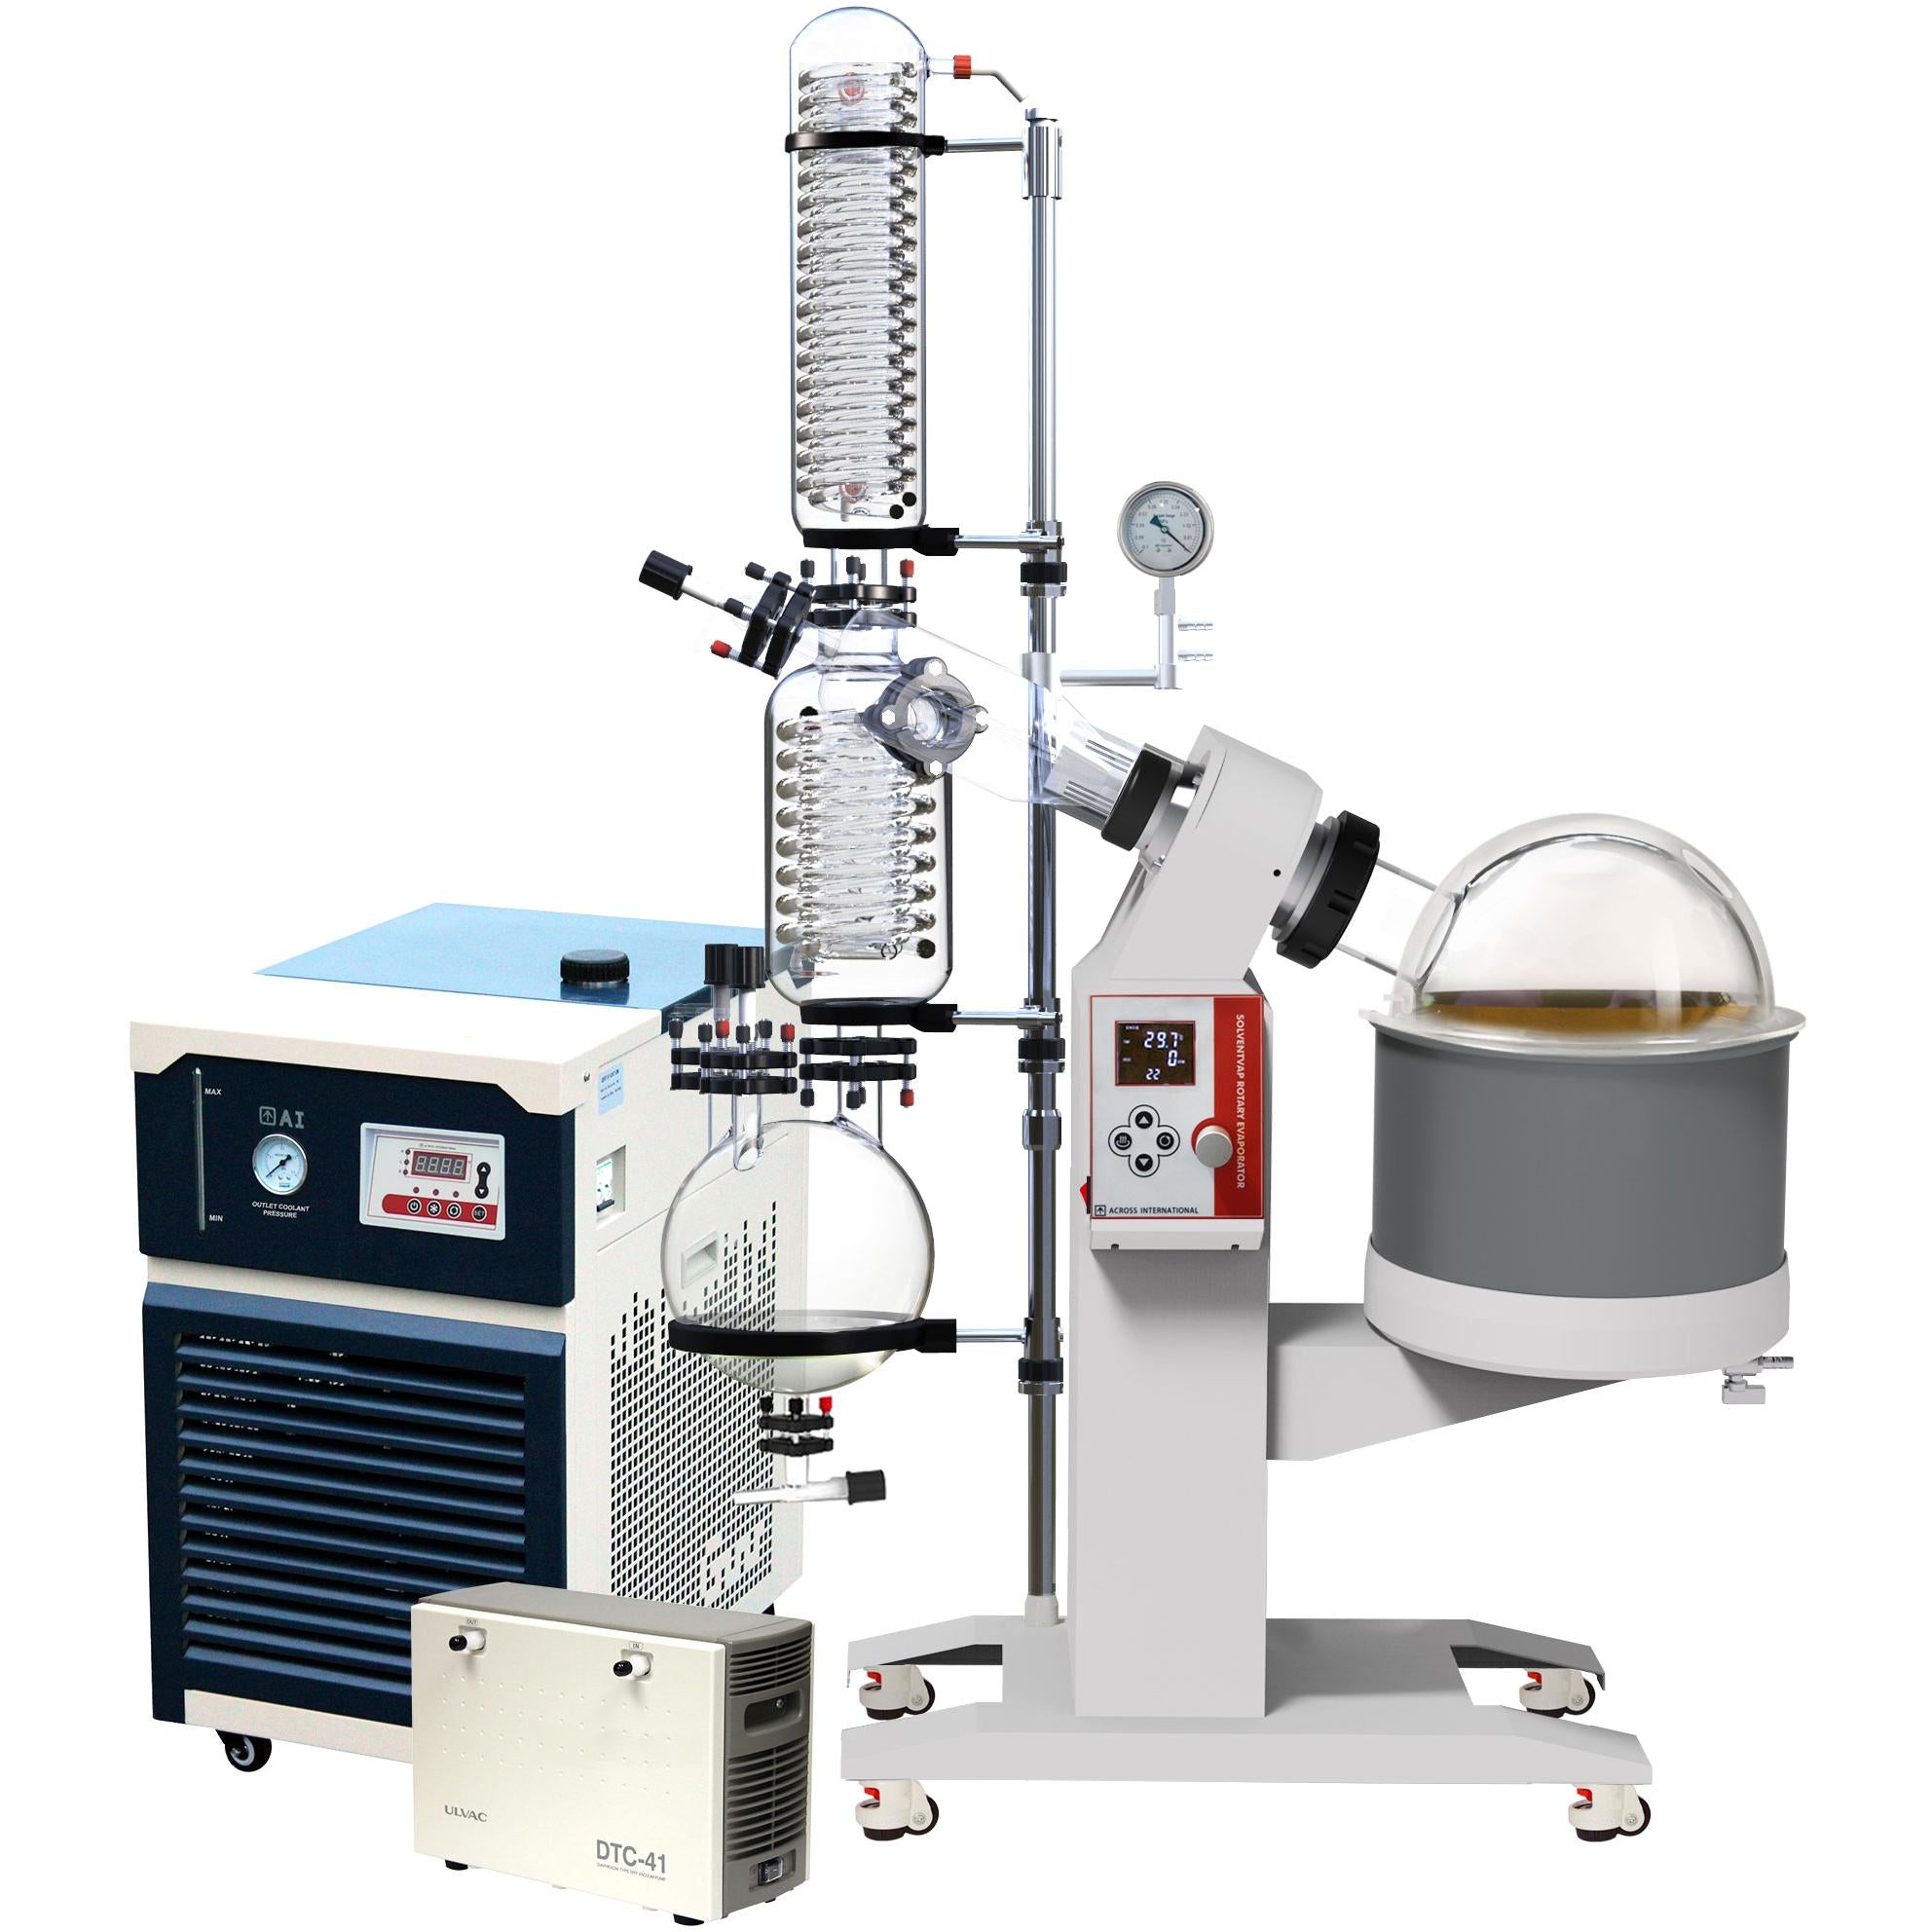 Ai SolventVap 10L Rotary Evaporator, Turnkey, with Ai C30 Chiller and ULVAC Pump